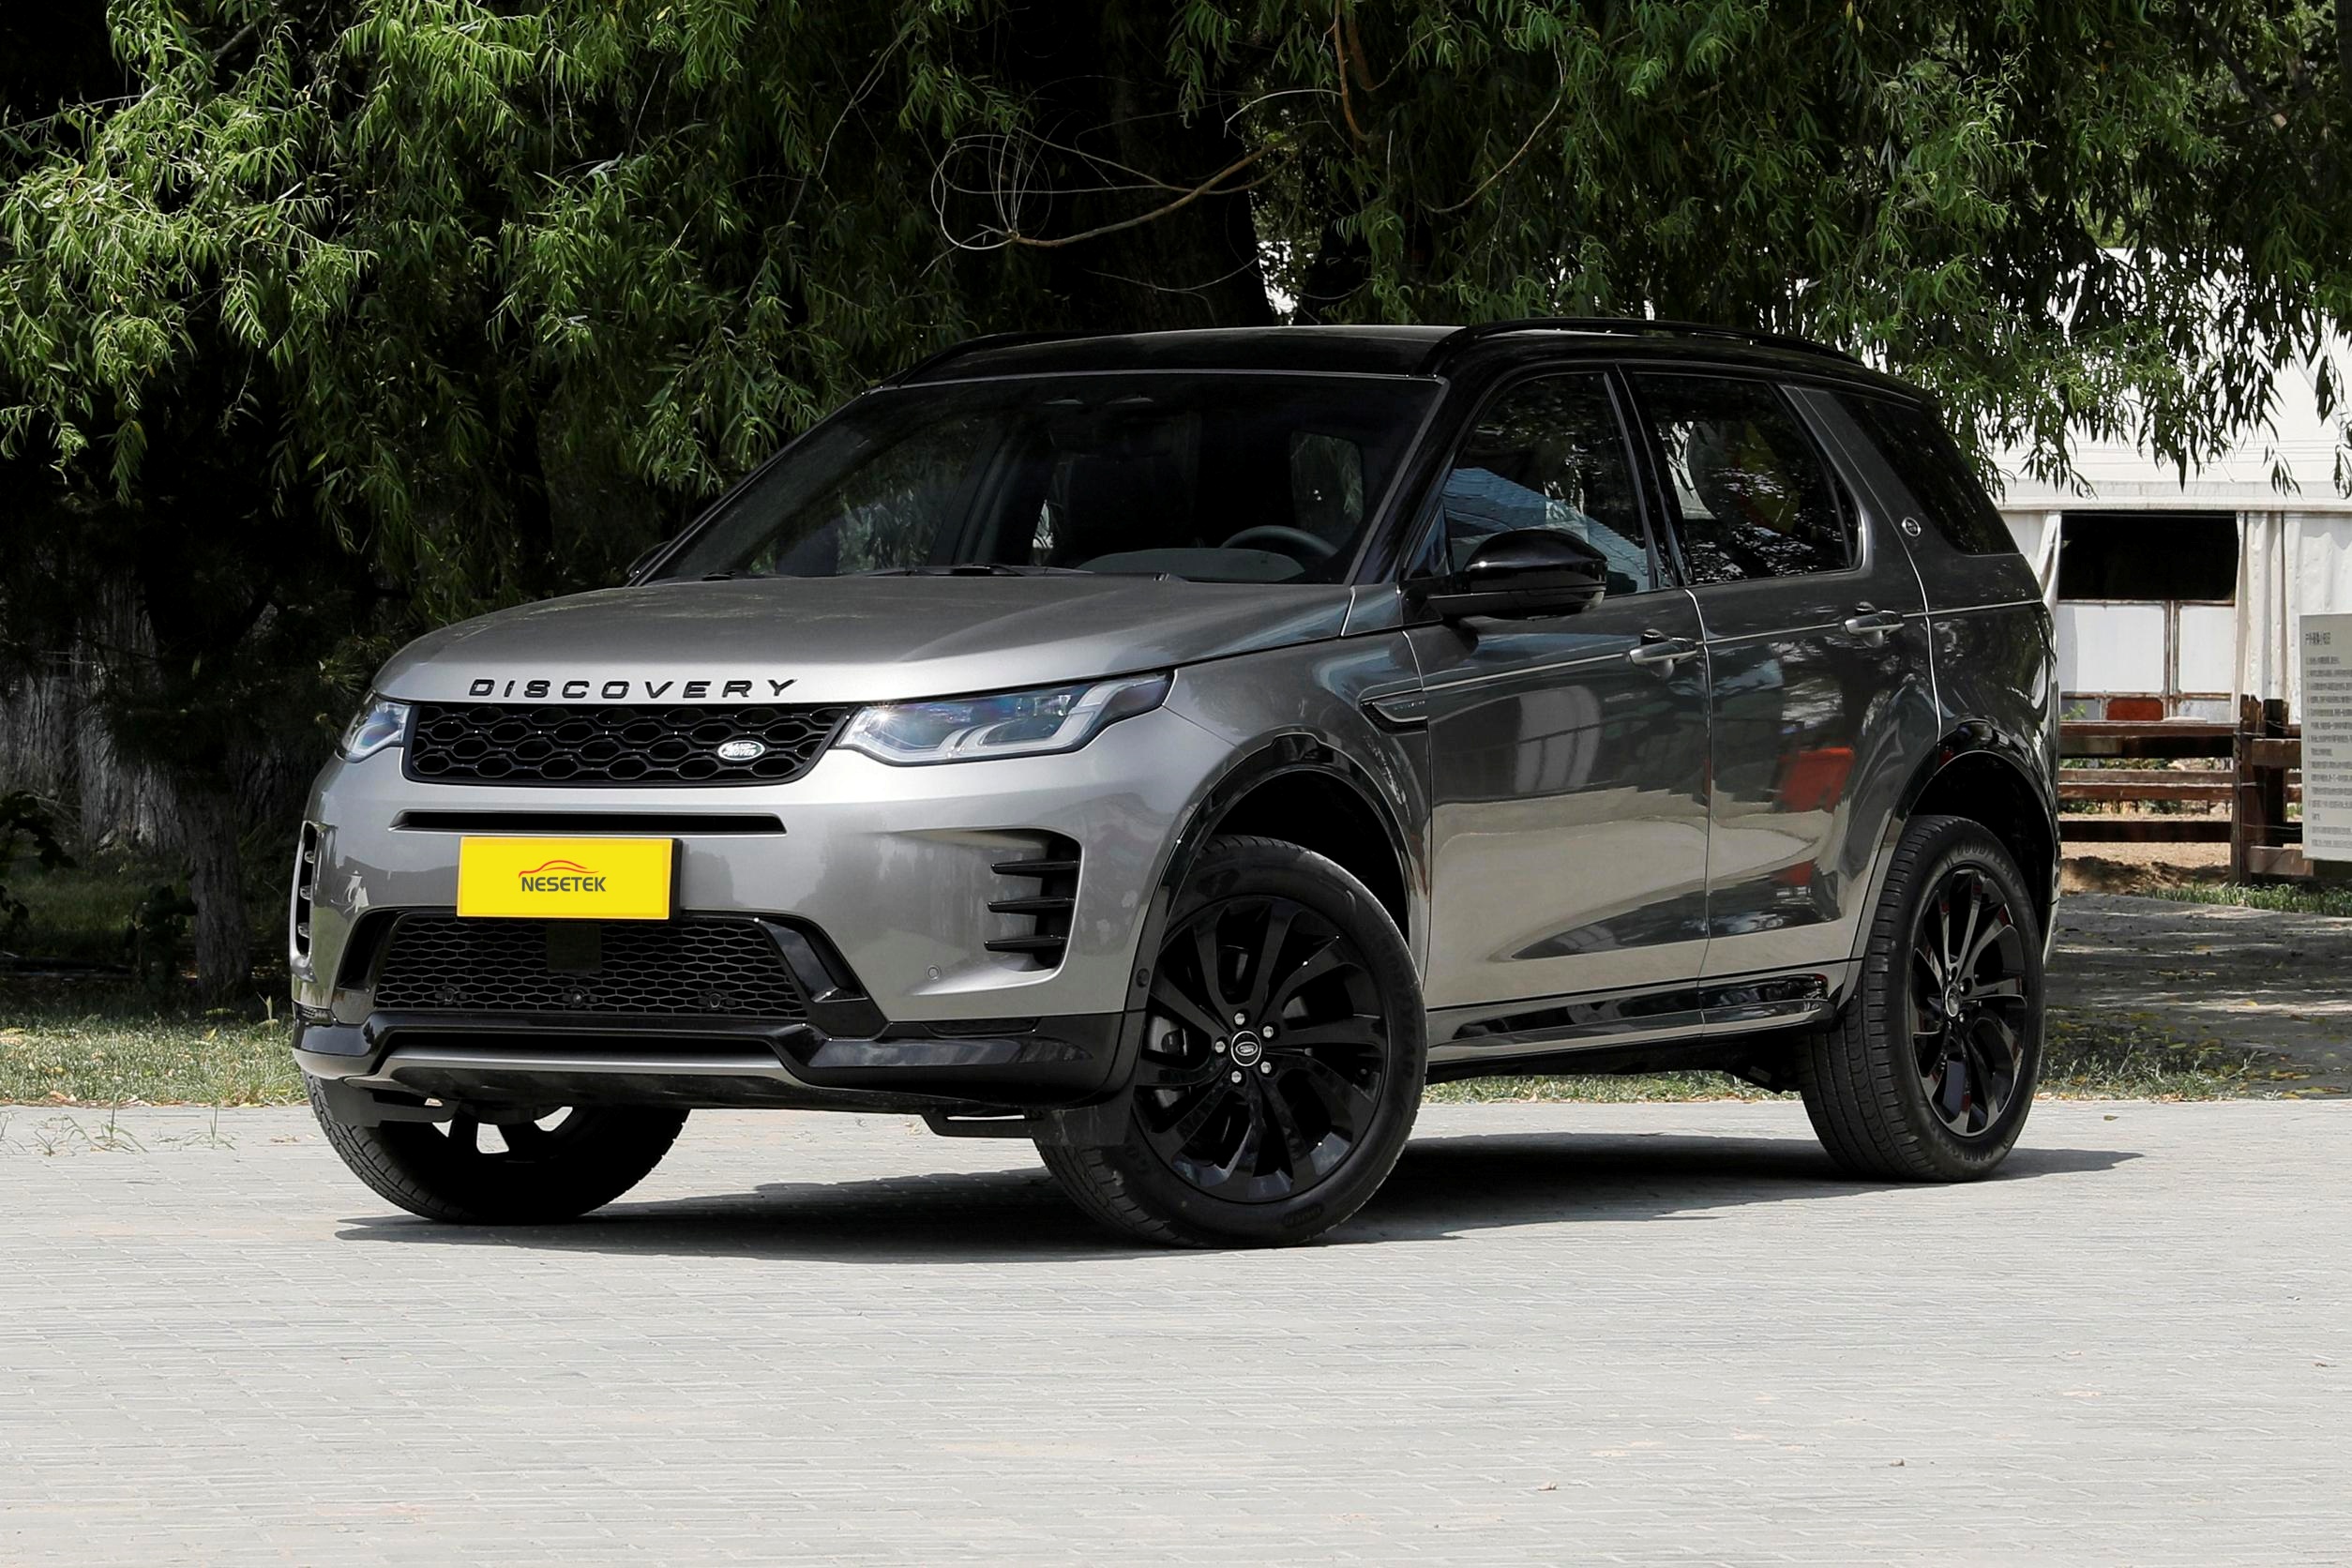 LAND ROVER Discovery Luxury SUV New AWD Sports Car Landrover Made in China Wesayîta Hybrid